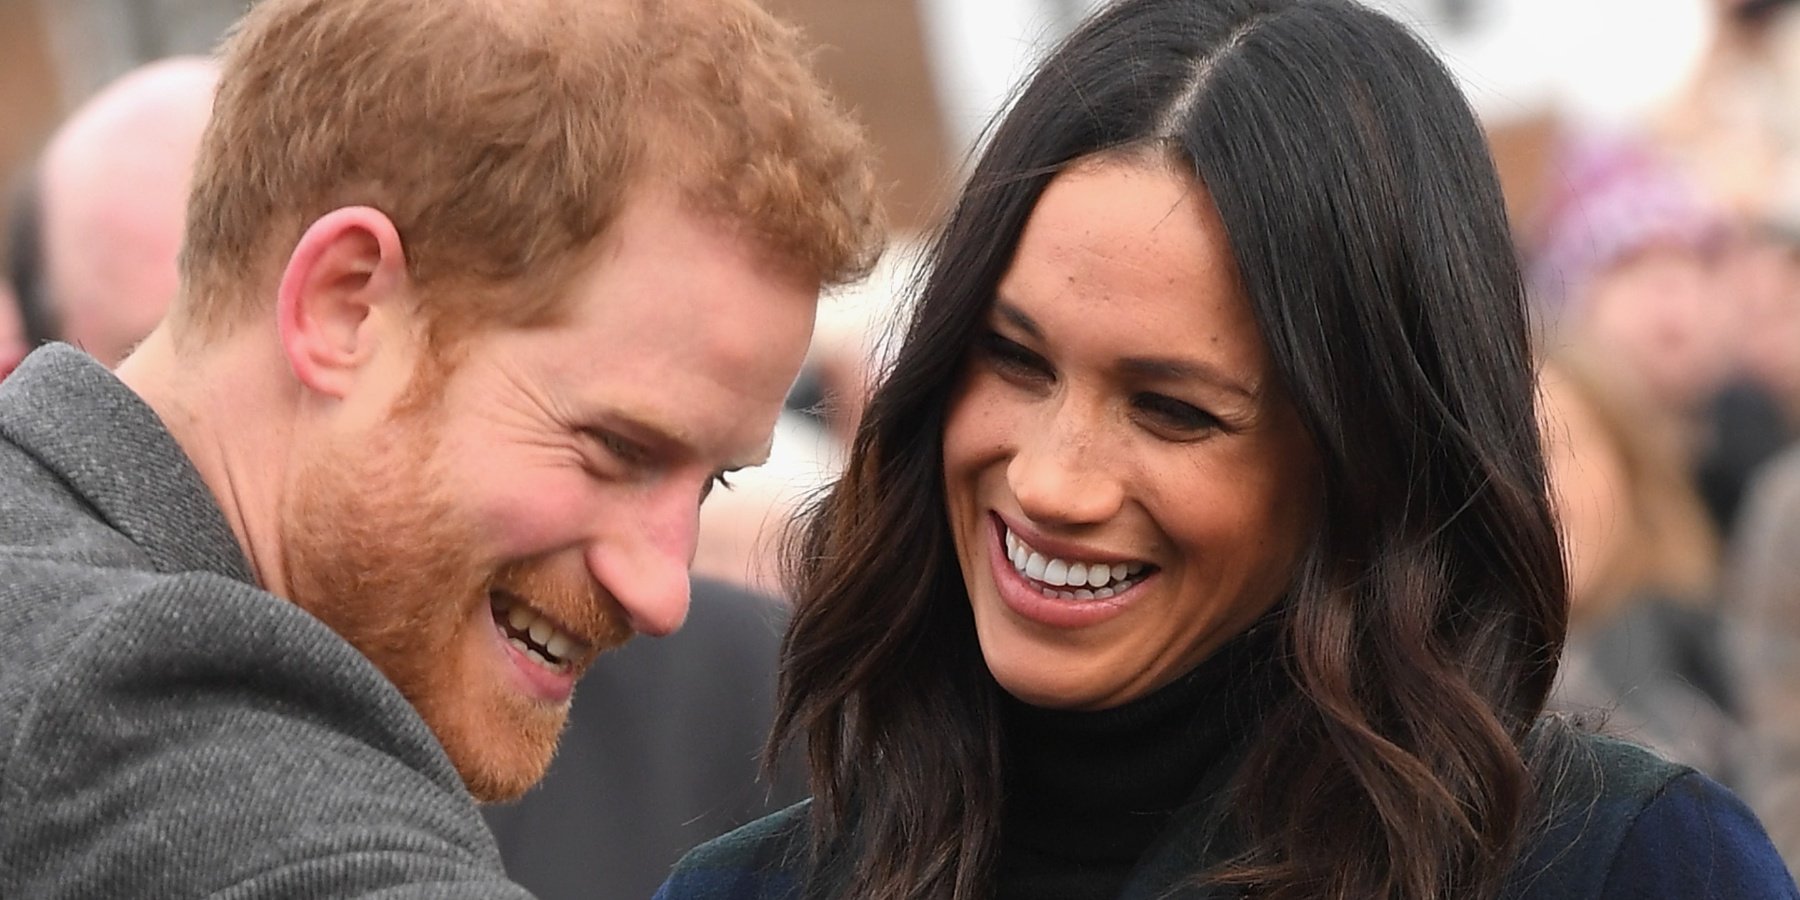 Prince Harry and Meghan Markle photographed in 2018 during their first official joint visit to Scotland.